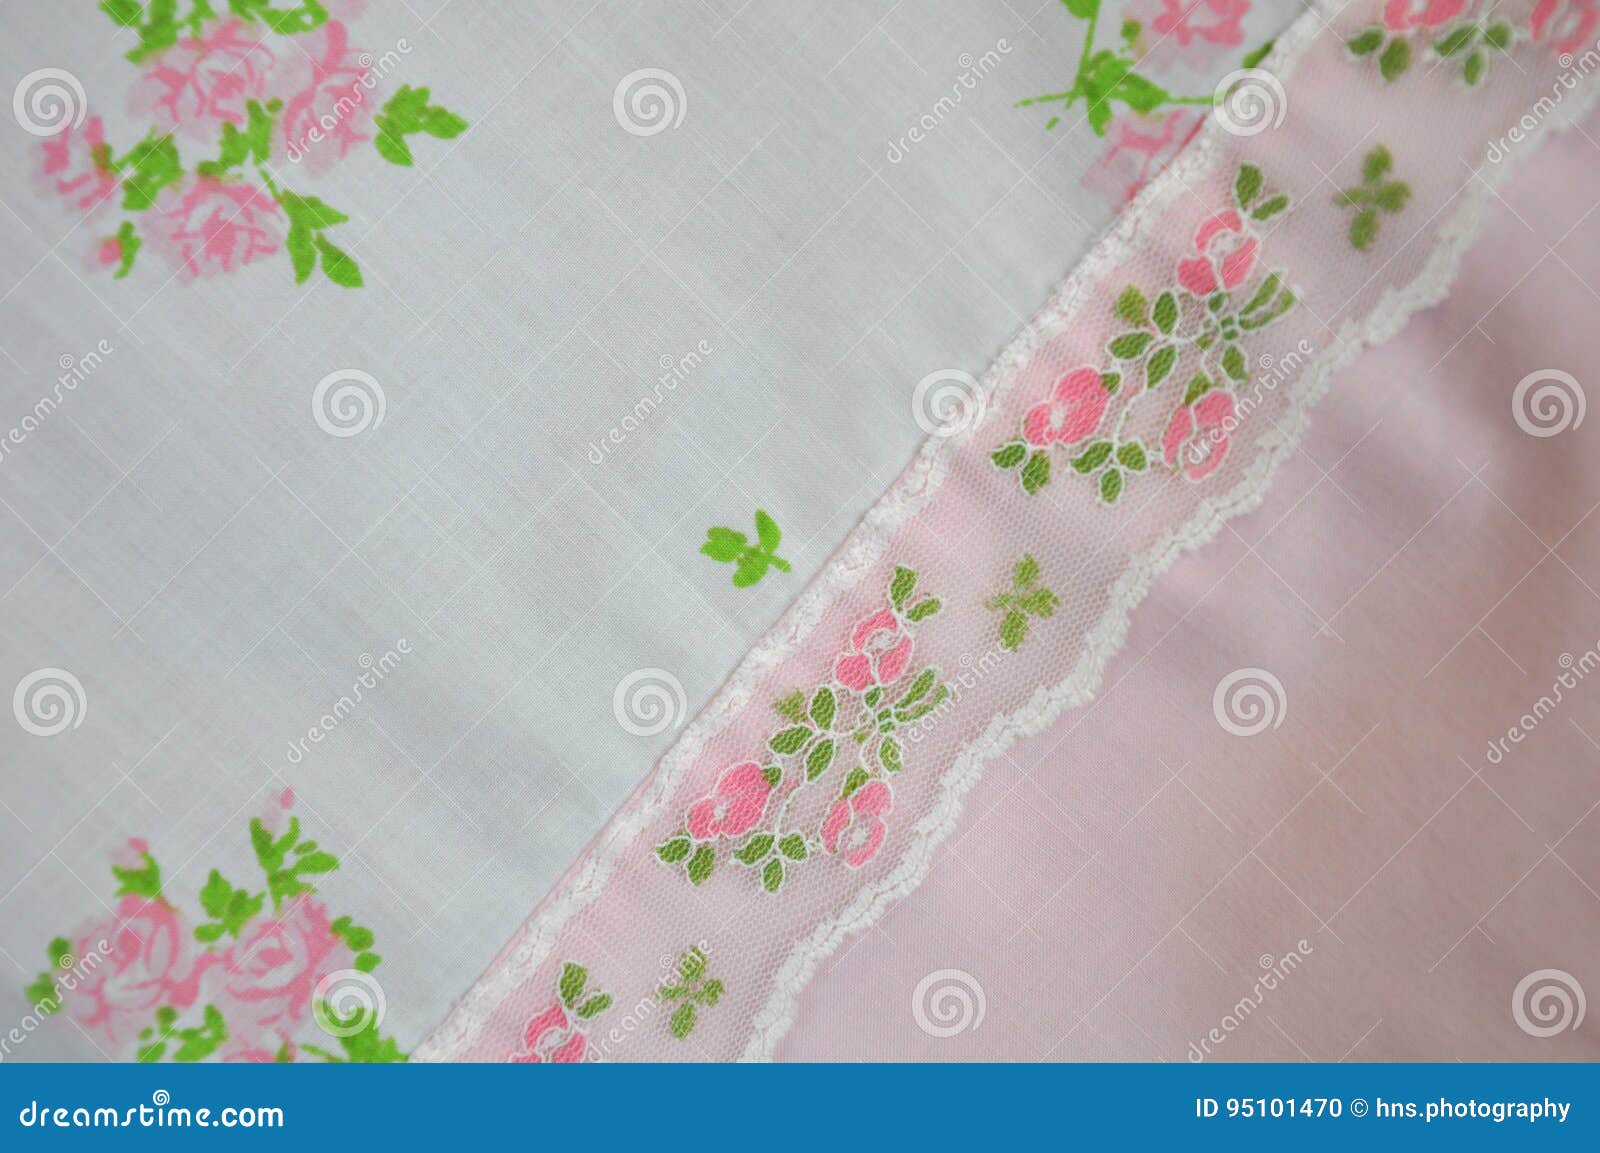 Vintage Floral Fabric with Lace Stock Photo - Image of background ...